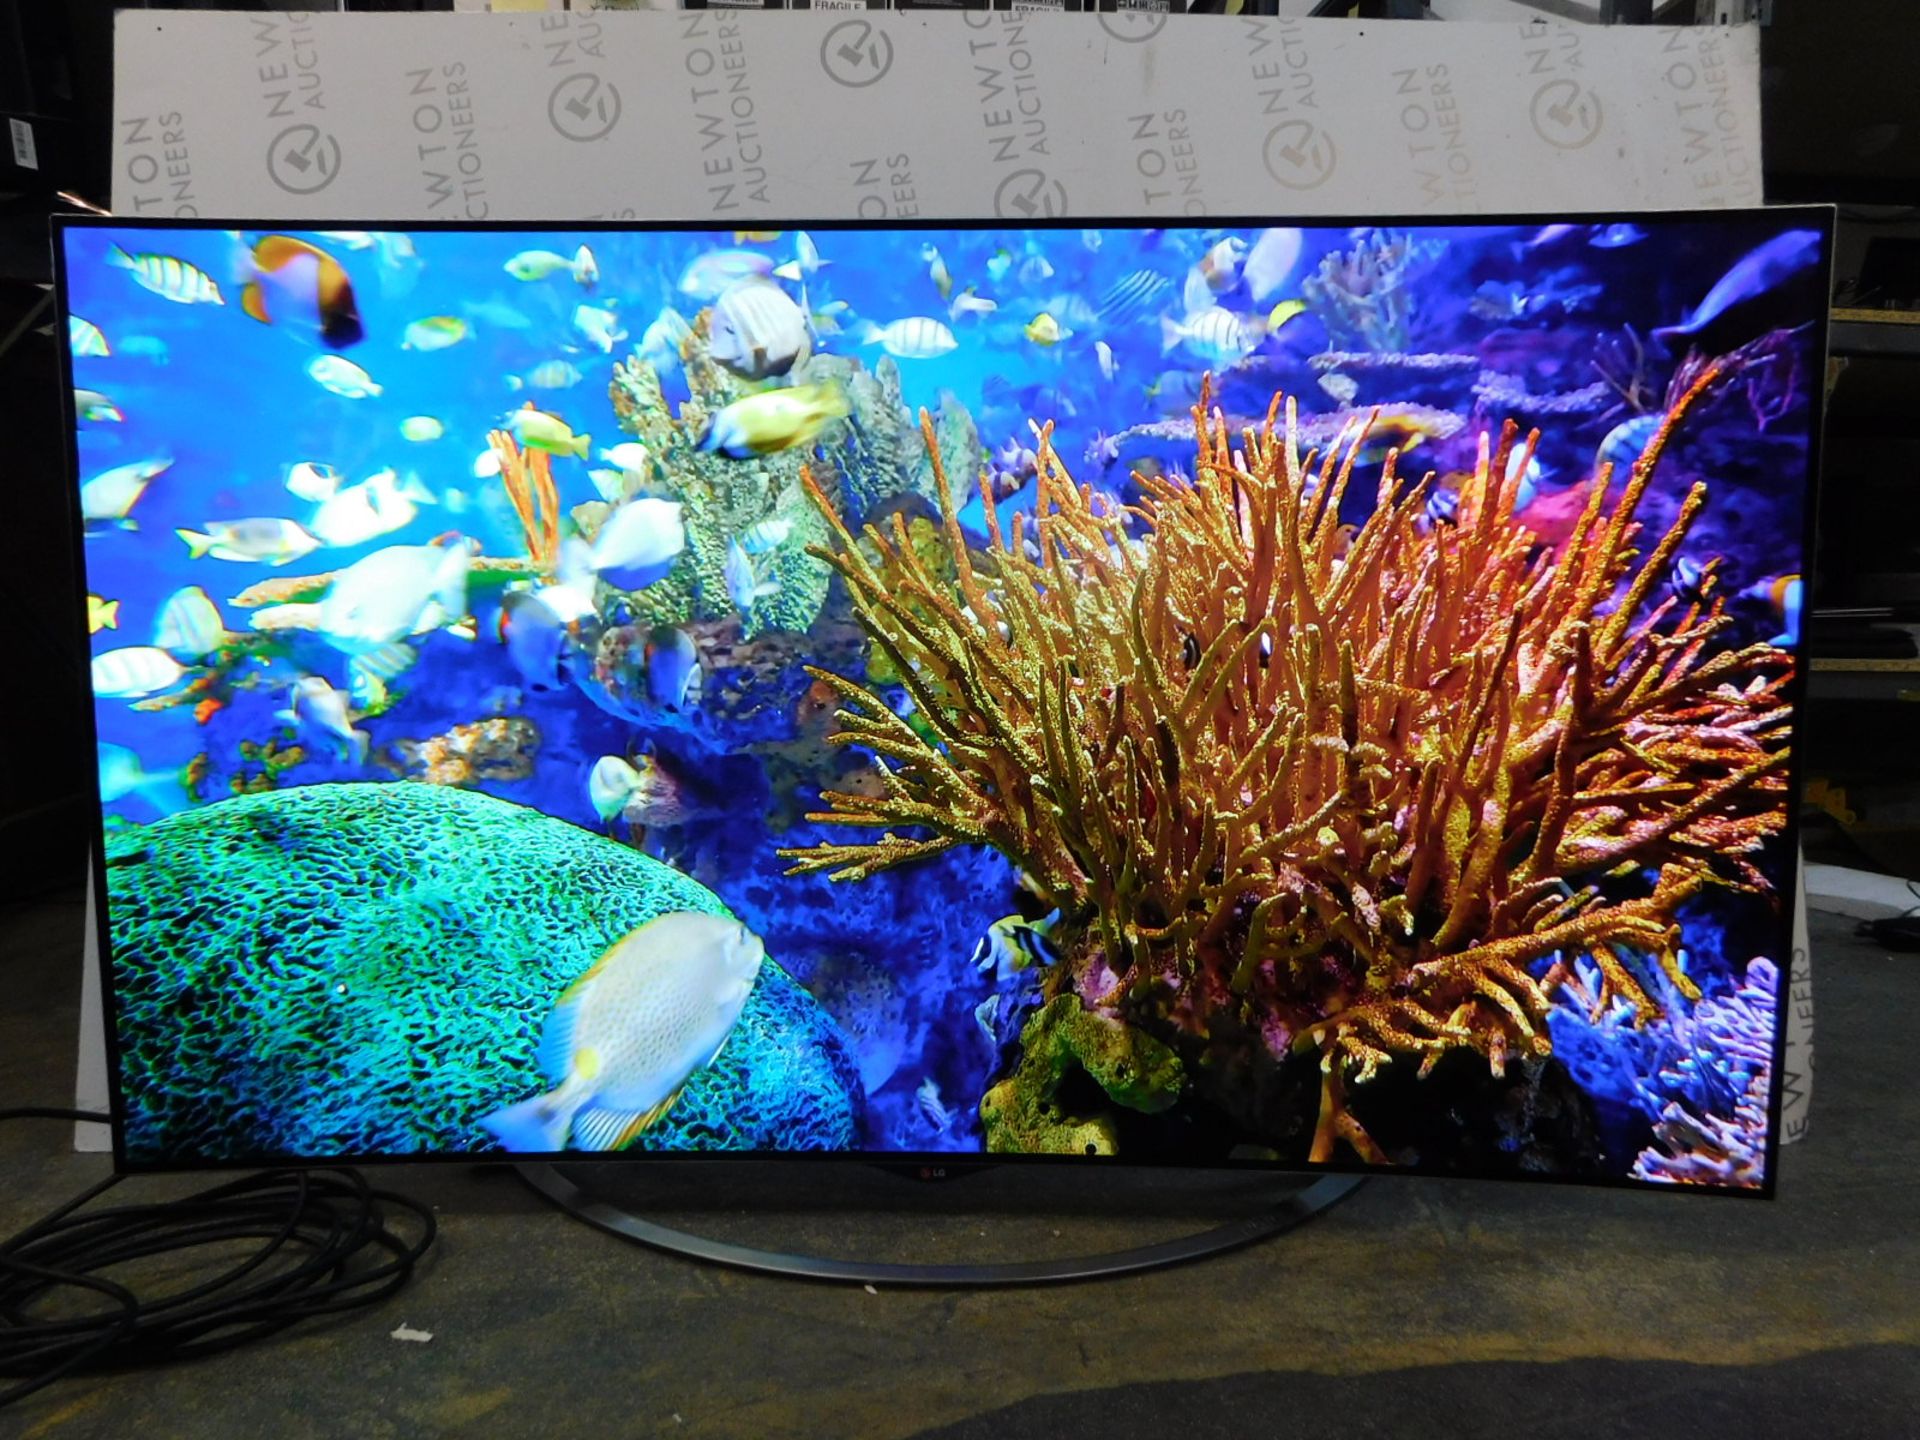 1 LG 65" 65EC970V 4K OLED ULTRA HD CURVED SMART TV WITH STAND RRP Â£1799 (WORKING, HAS VERY FAINT